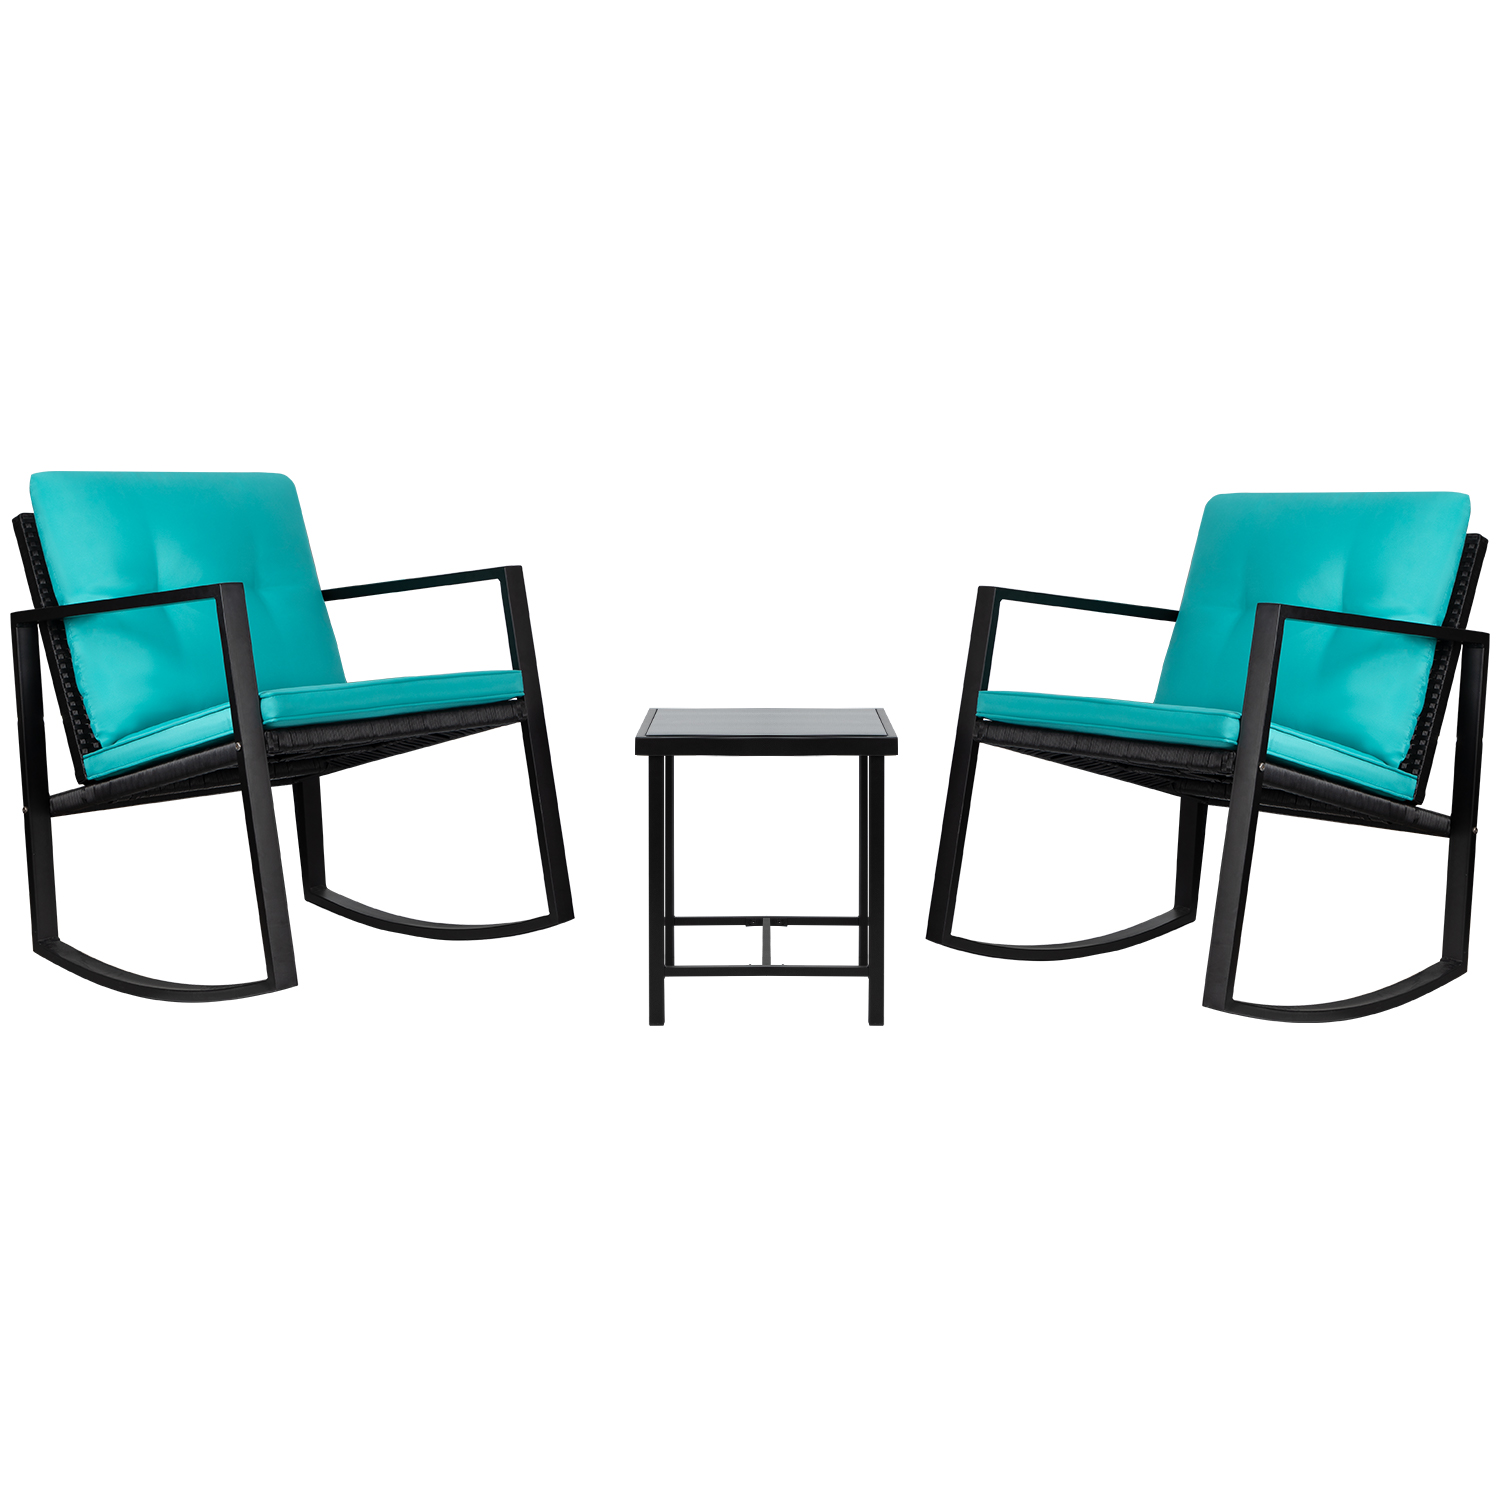 Lacoo 3 Pieces Patio Furniture Set Rocking Wicker Bistro Sets Modern Outdoor Rocking Chair Furniture Sets Cushioned PE Rattan Chairs Conversation Sets with Glass Coffee Table (Blue) - image 1 of 7